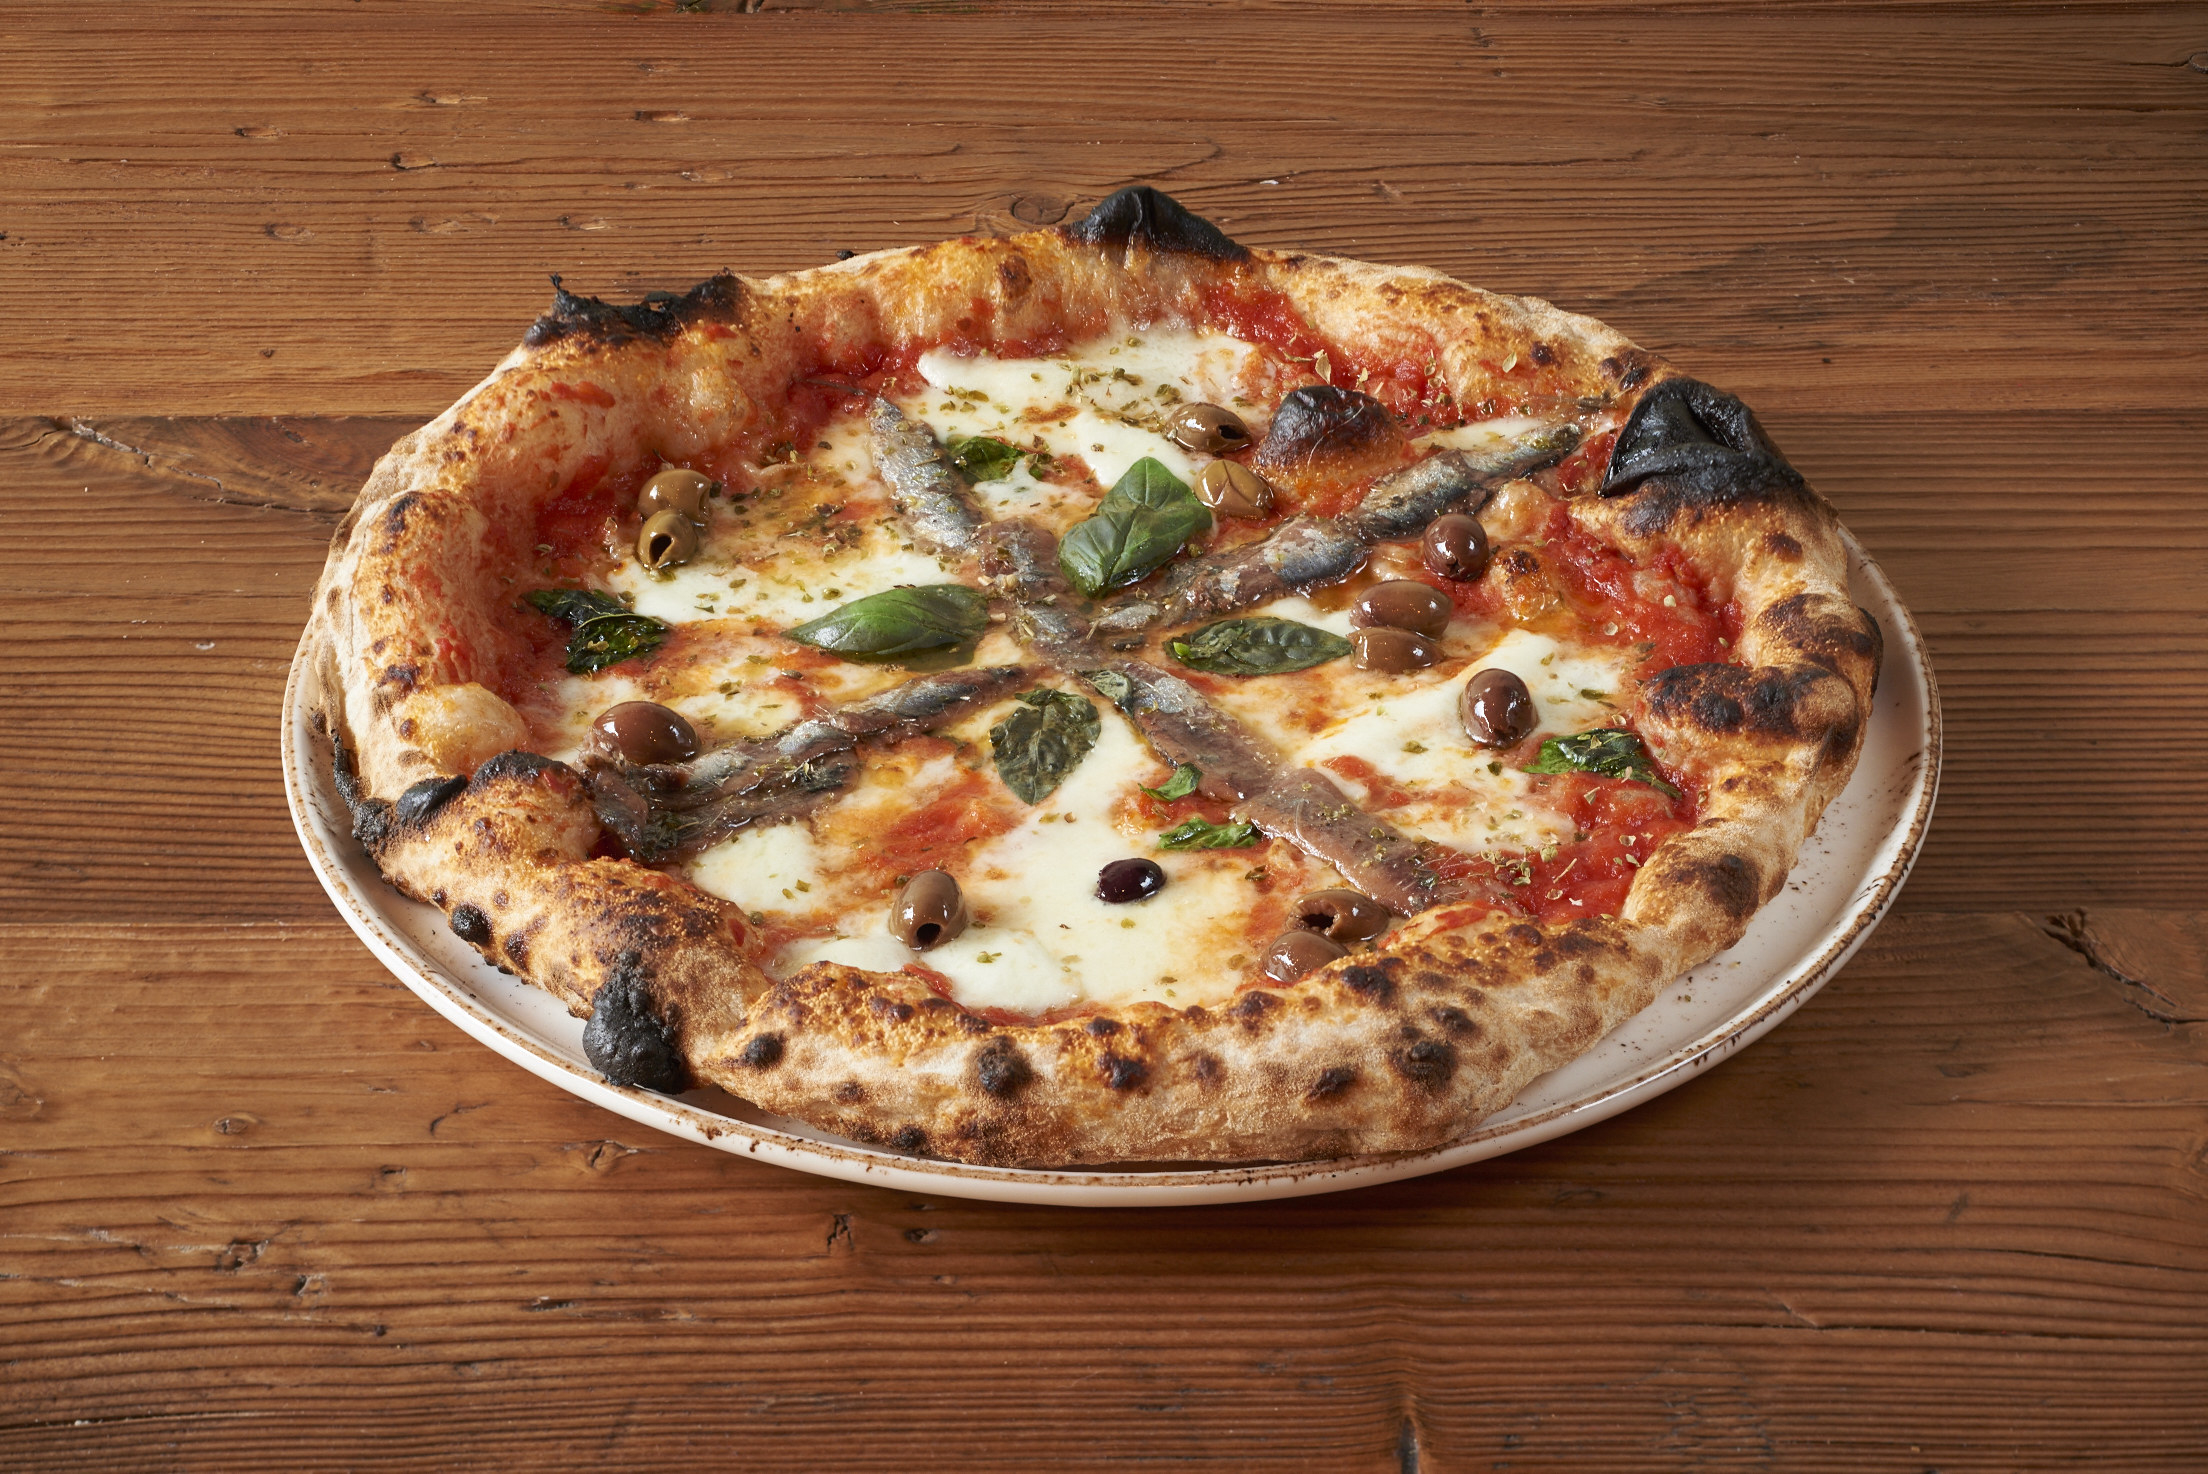 A Neopolitan pizza with anchovies